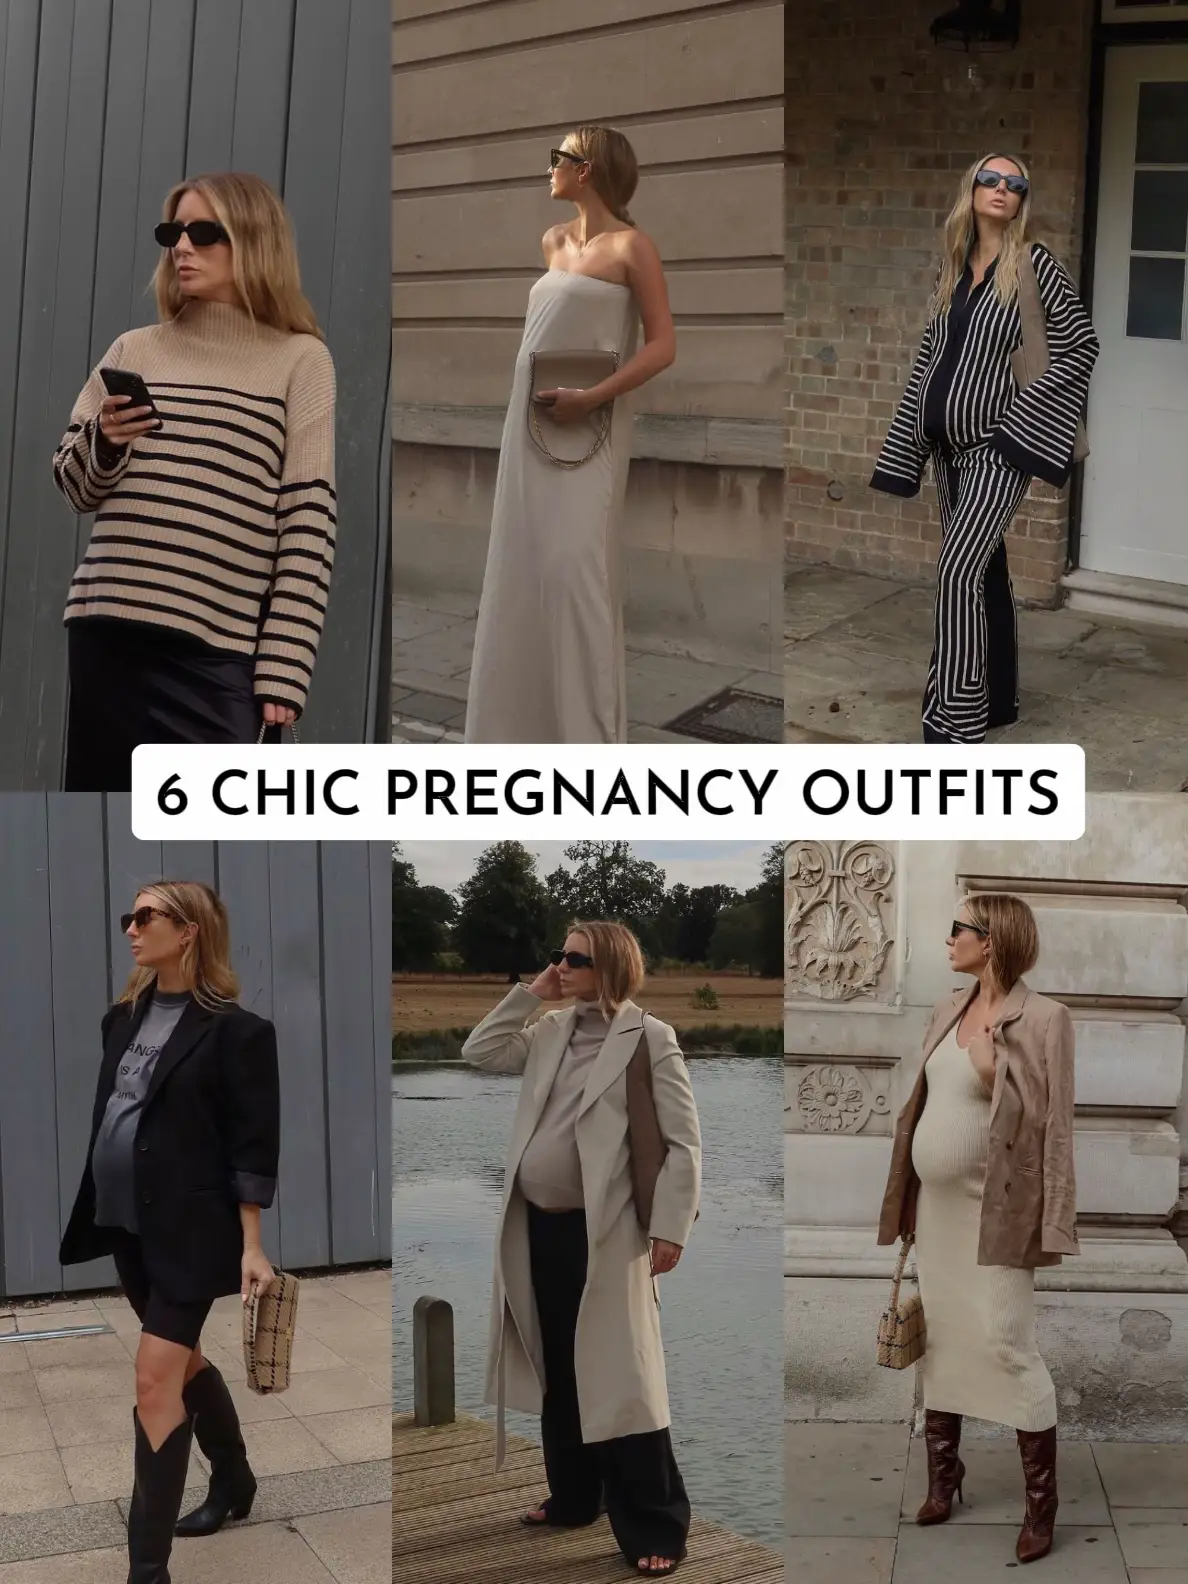 Pregnancy Clothing Must Haves - Capsule Wardrobe Essentials To Get You  Through Every Trimester + Style Ideas To Help You Feel Your Best — Lauren  Natalia